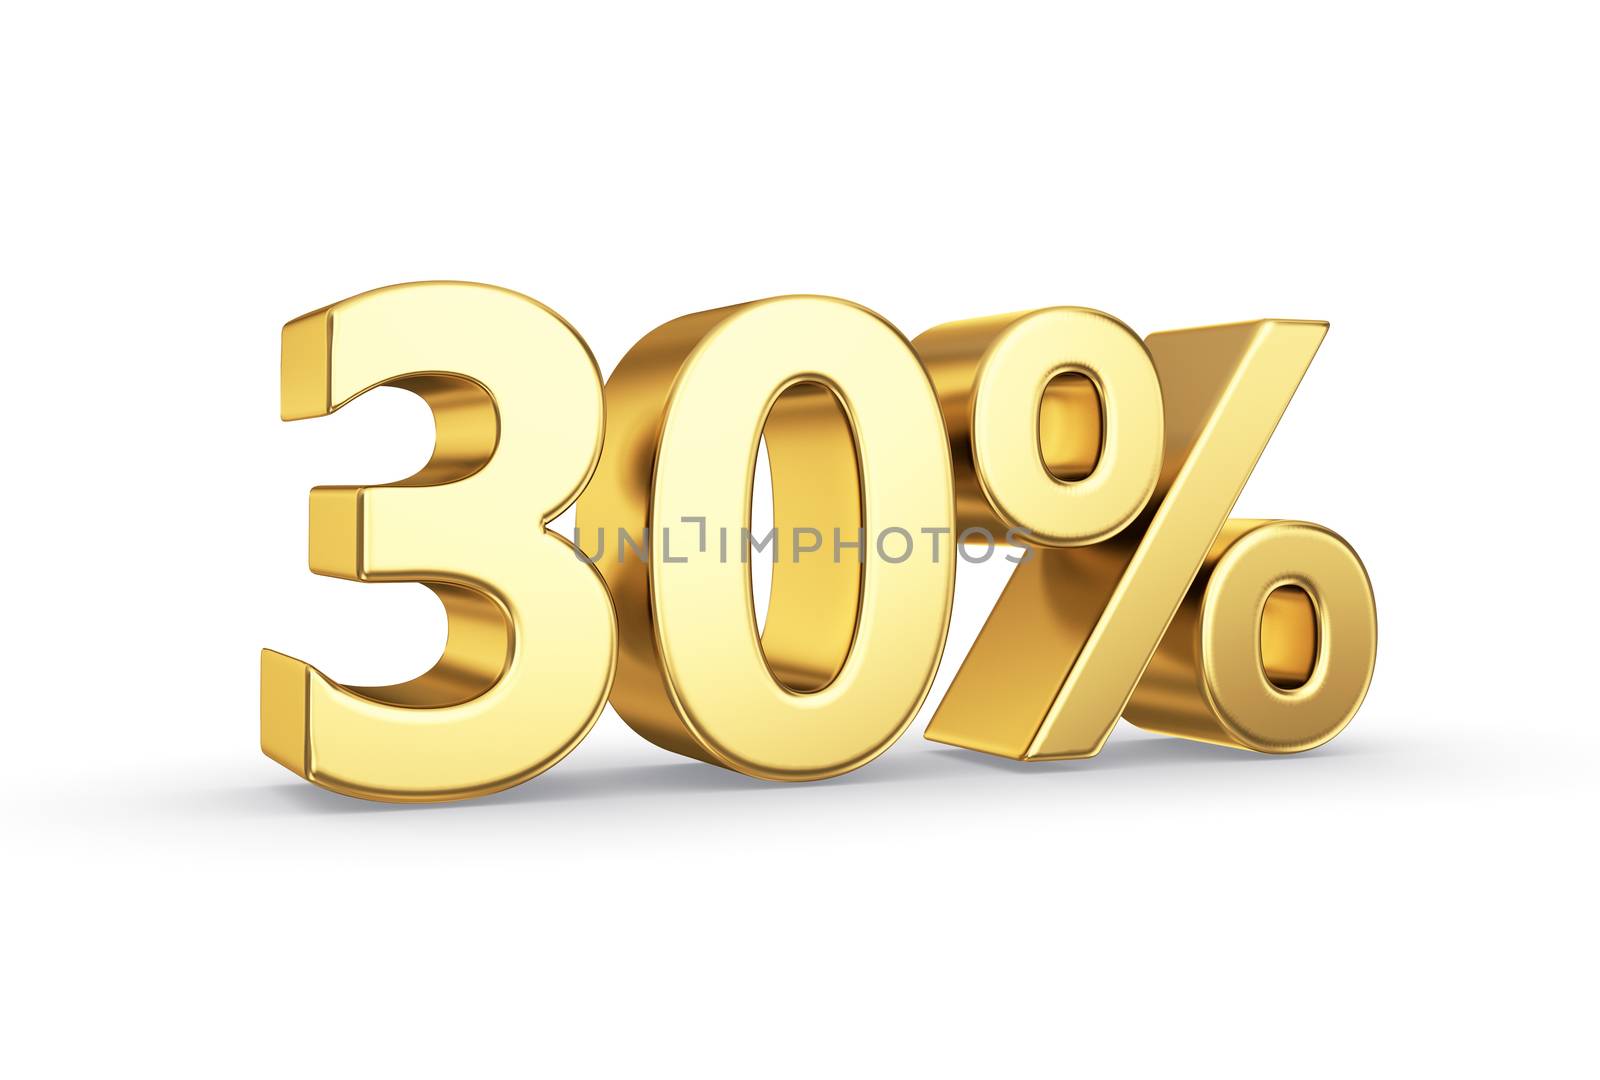 golden 3D percentage icon - isolated with clipping path